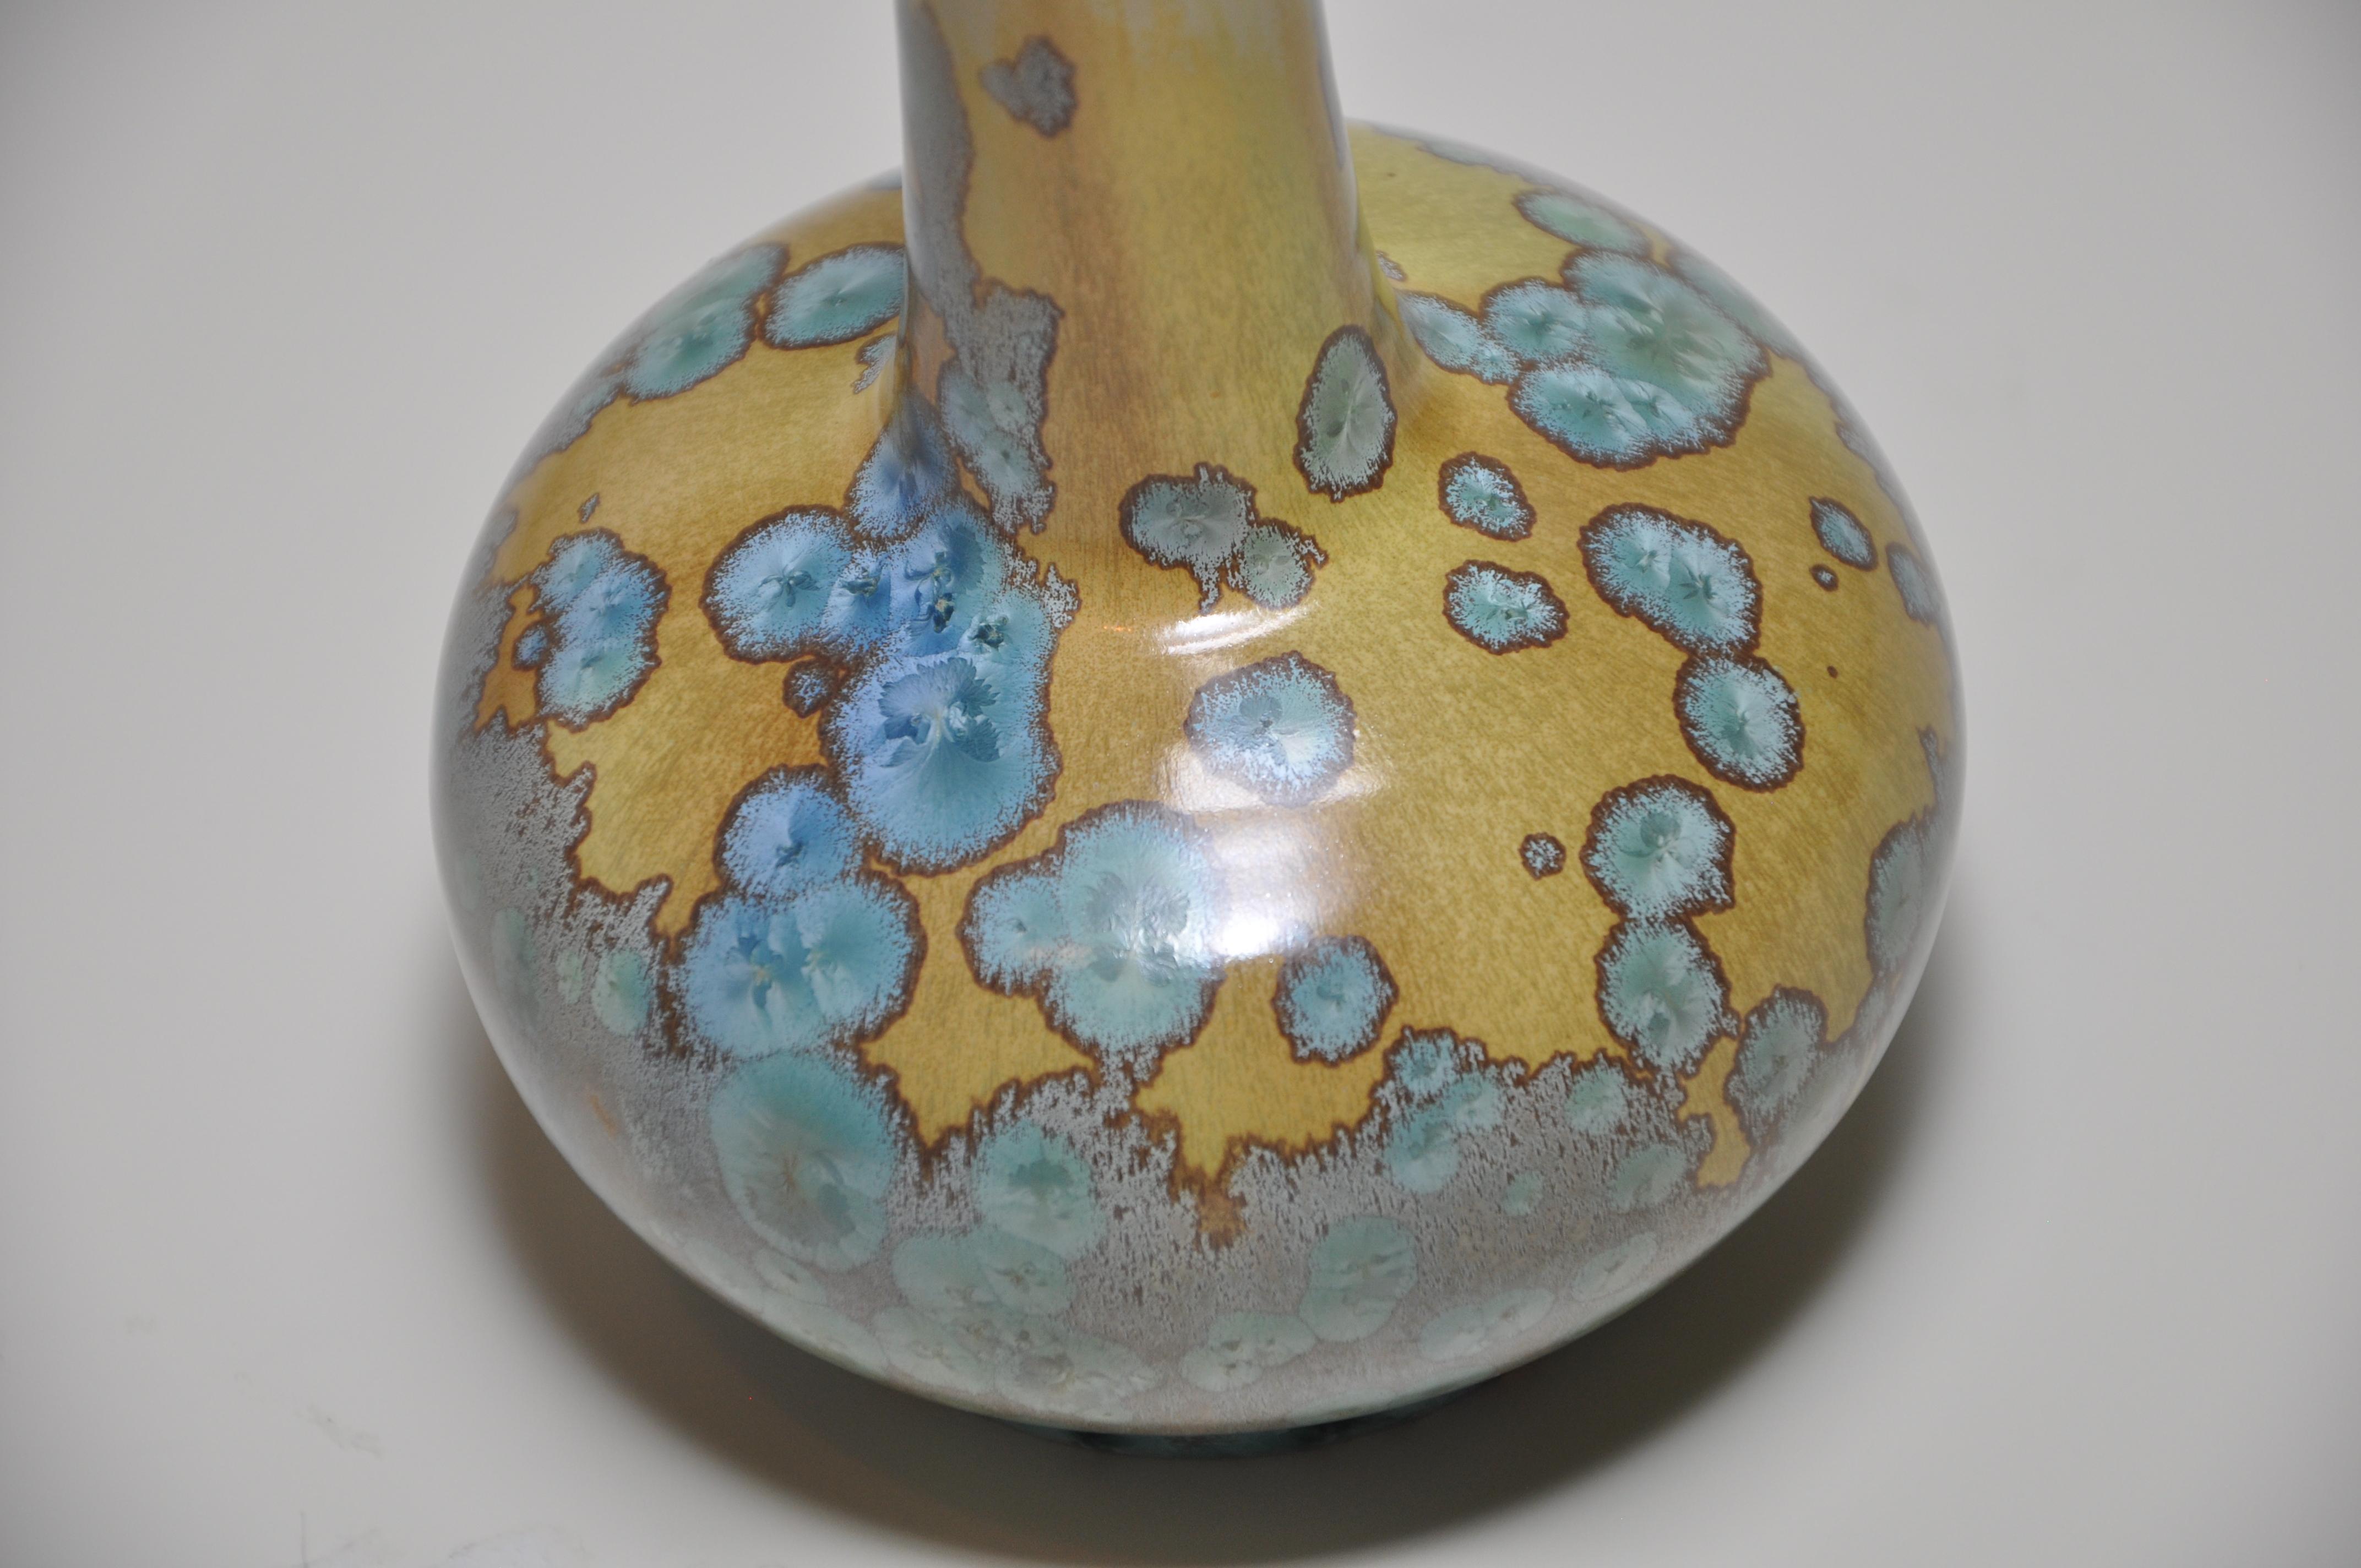 Rare French Art Nouveau ceramic vase of globular form by Alfred Renoleau, 
with very pretty crystalline bluish green crystalline glaze over a softly tone pale ochre body. 
An exquisite example of his work, fit for a museum.

  

Please note